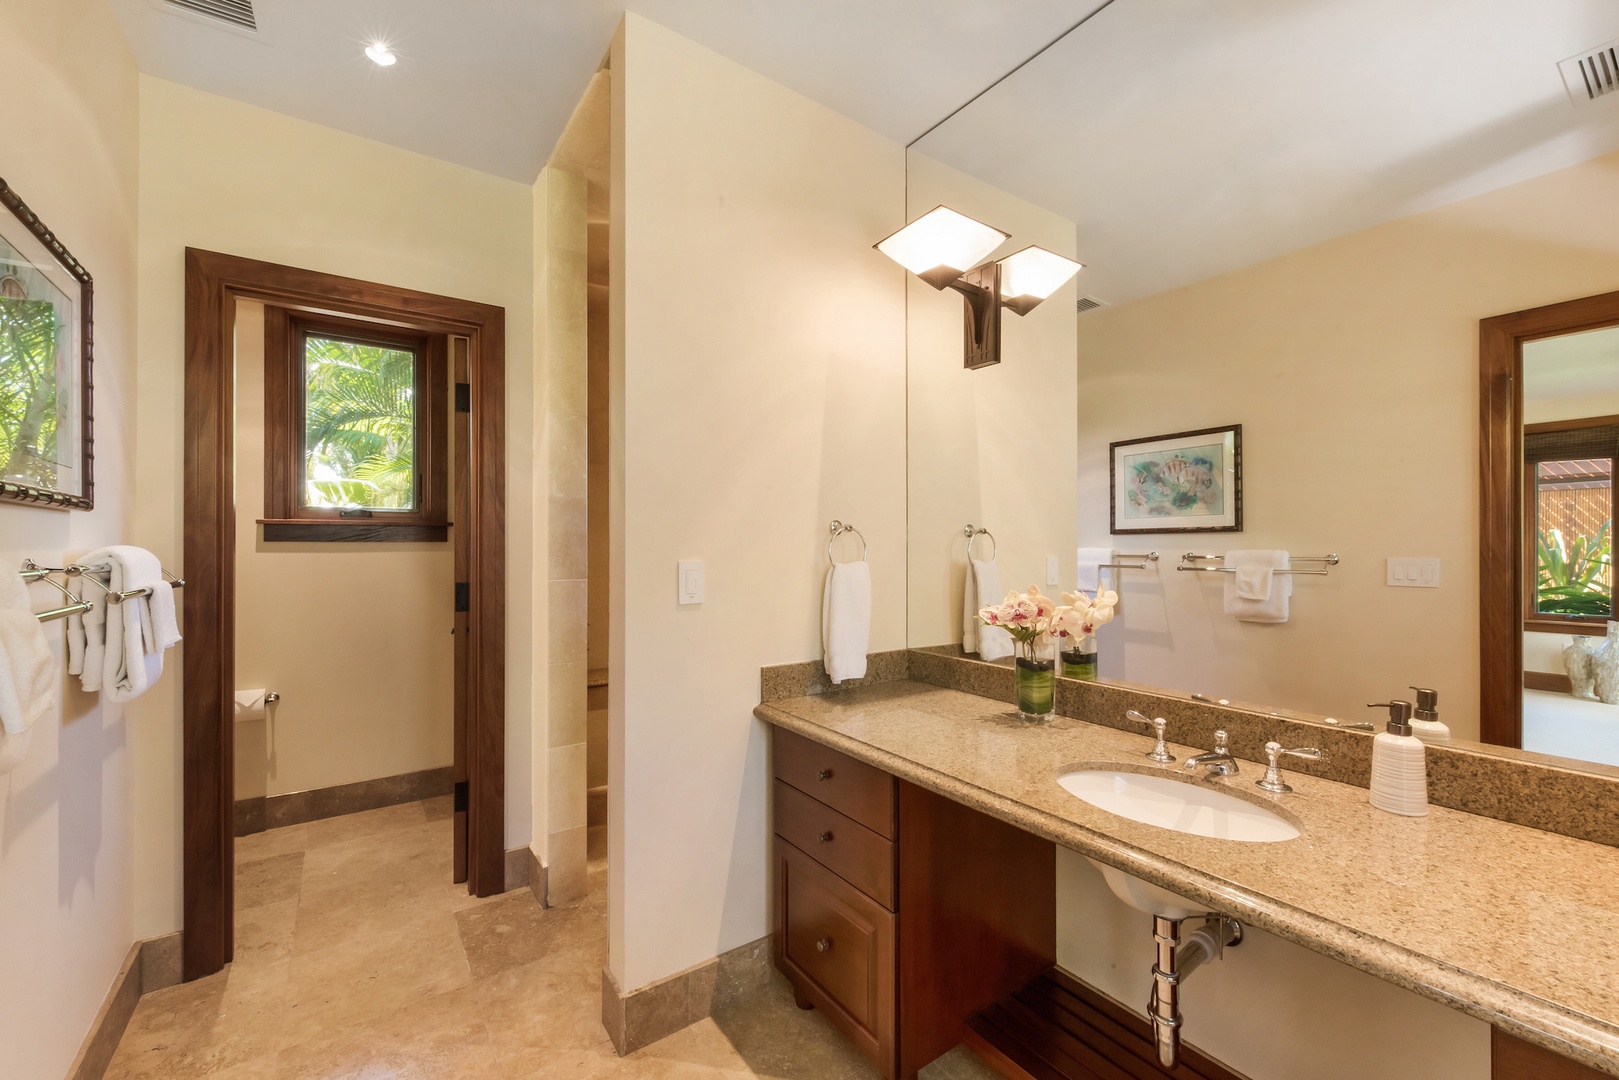 Kamuela Vacation Rentals, 3BD OneOcean (1C) at Mauna Lani Resort - "Ohana" Guest Cottage Ensuite Bath w/ Dual Sinks, Large Stone Shower and Separate Water Closet.